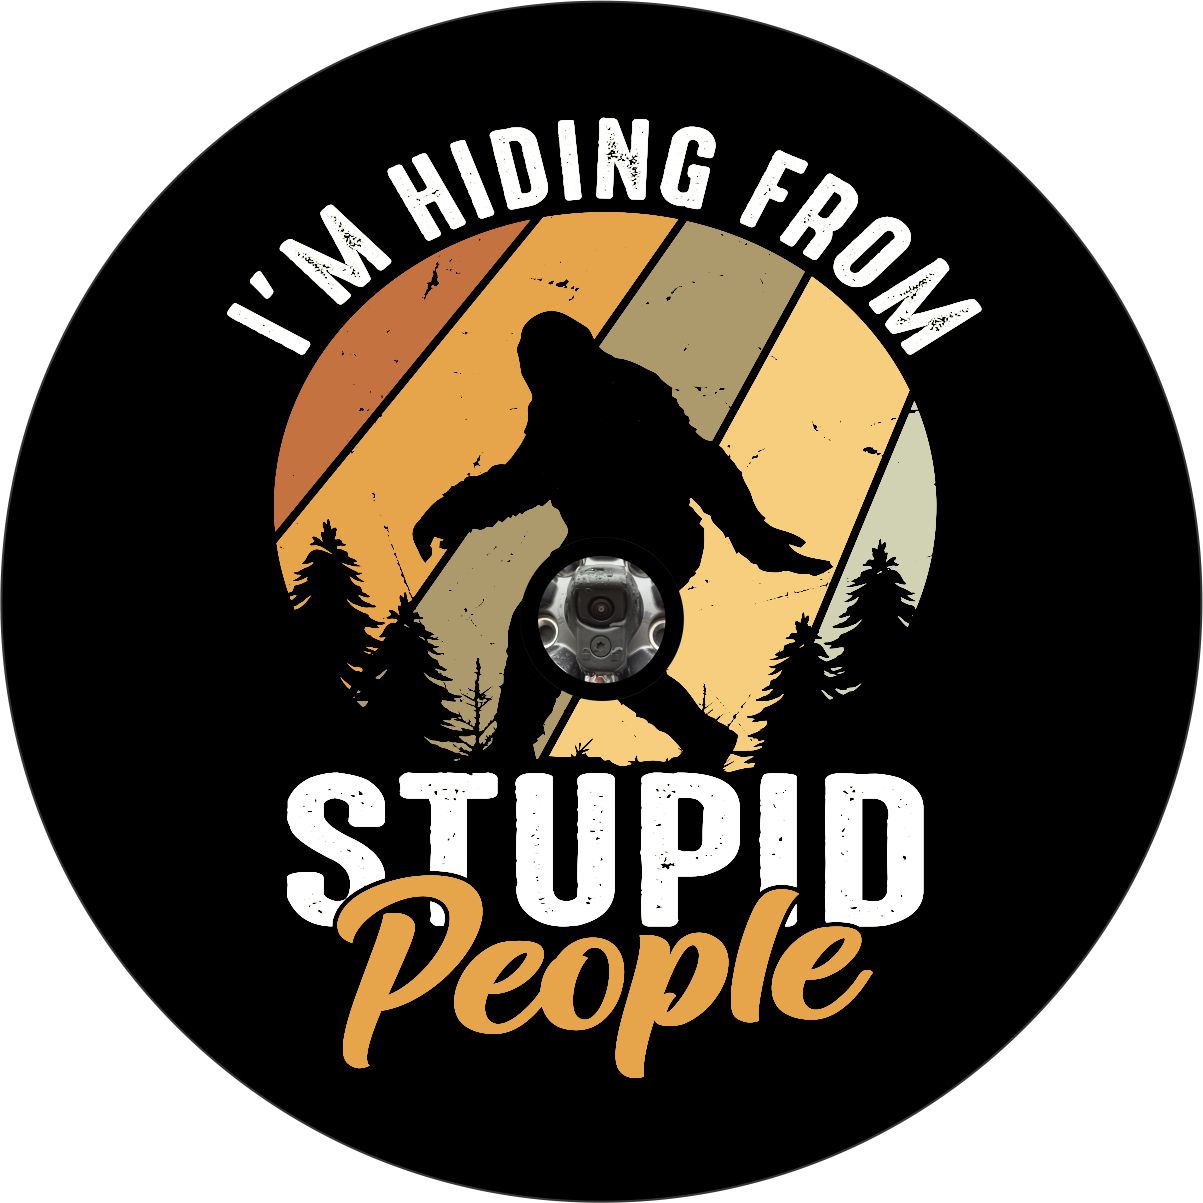 Vibrant and high quality vinyl spare tire cover made from orange and red earth tones with a silhouette of sasquatch and the saying, I'm hiding from stupid people with a camera hole for a backup camera.